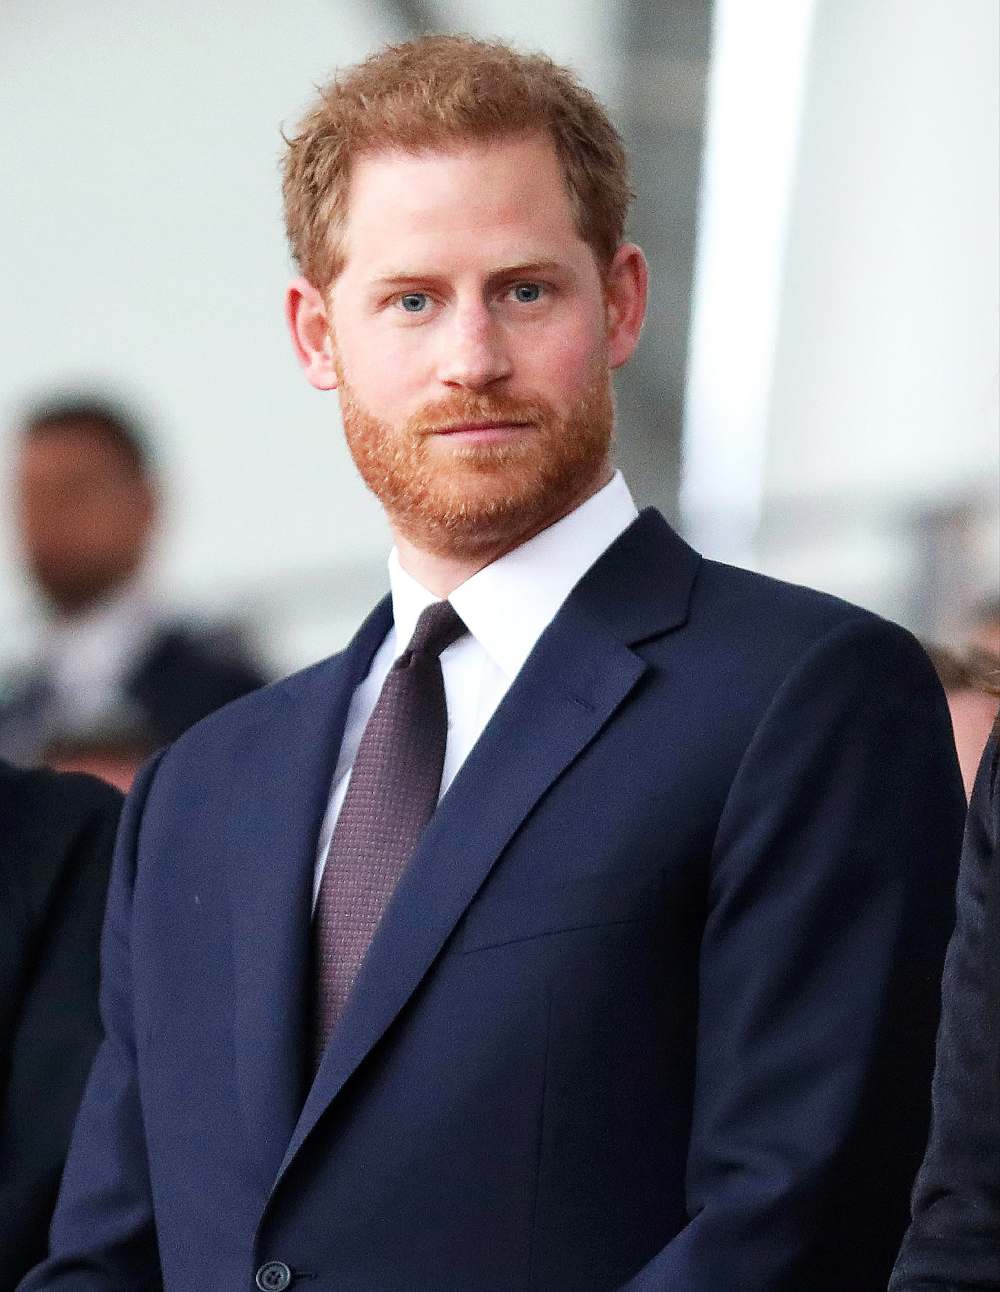 Prince Harry Arranged for Flowers to Be Laid at Late Mom Princess Diana's Grave for Mother's Day